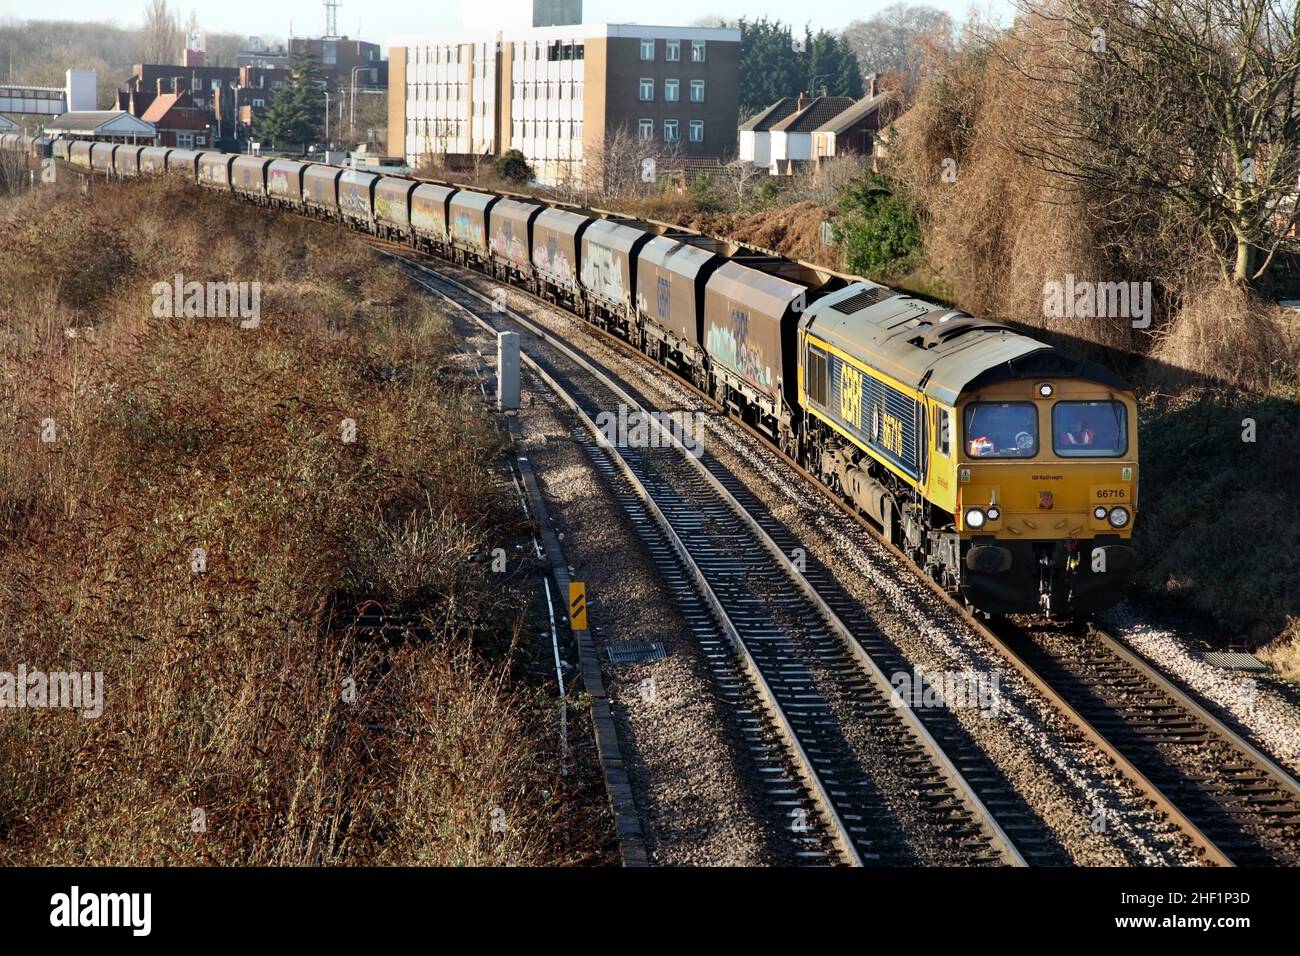 GB Railfreight Class 66 loco 66716 hauls the 4R79 1005 Doncaster to Immingham empty wagon service through Scunthorpe on 13/01/22. Stock Photo